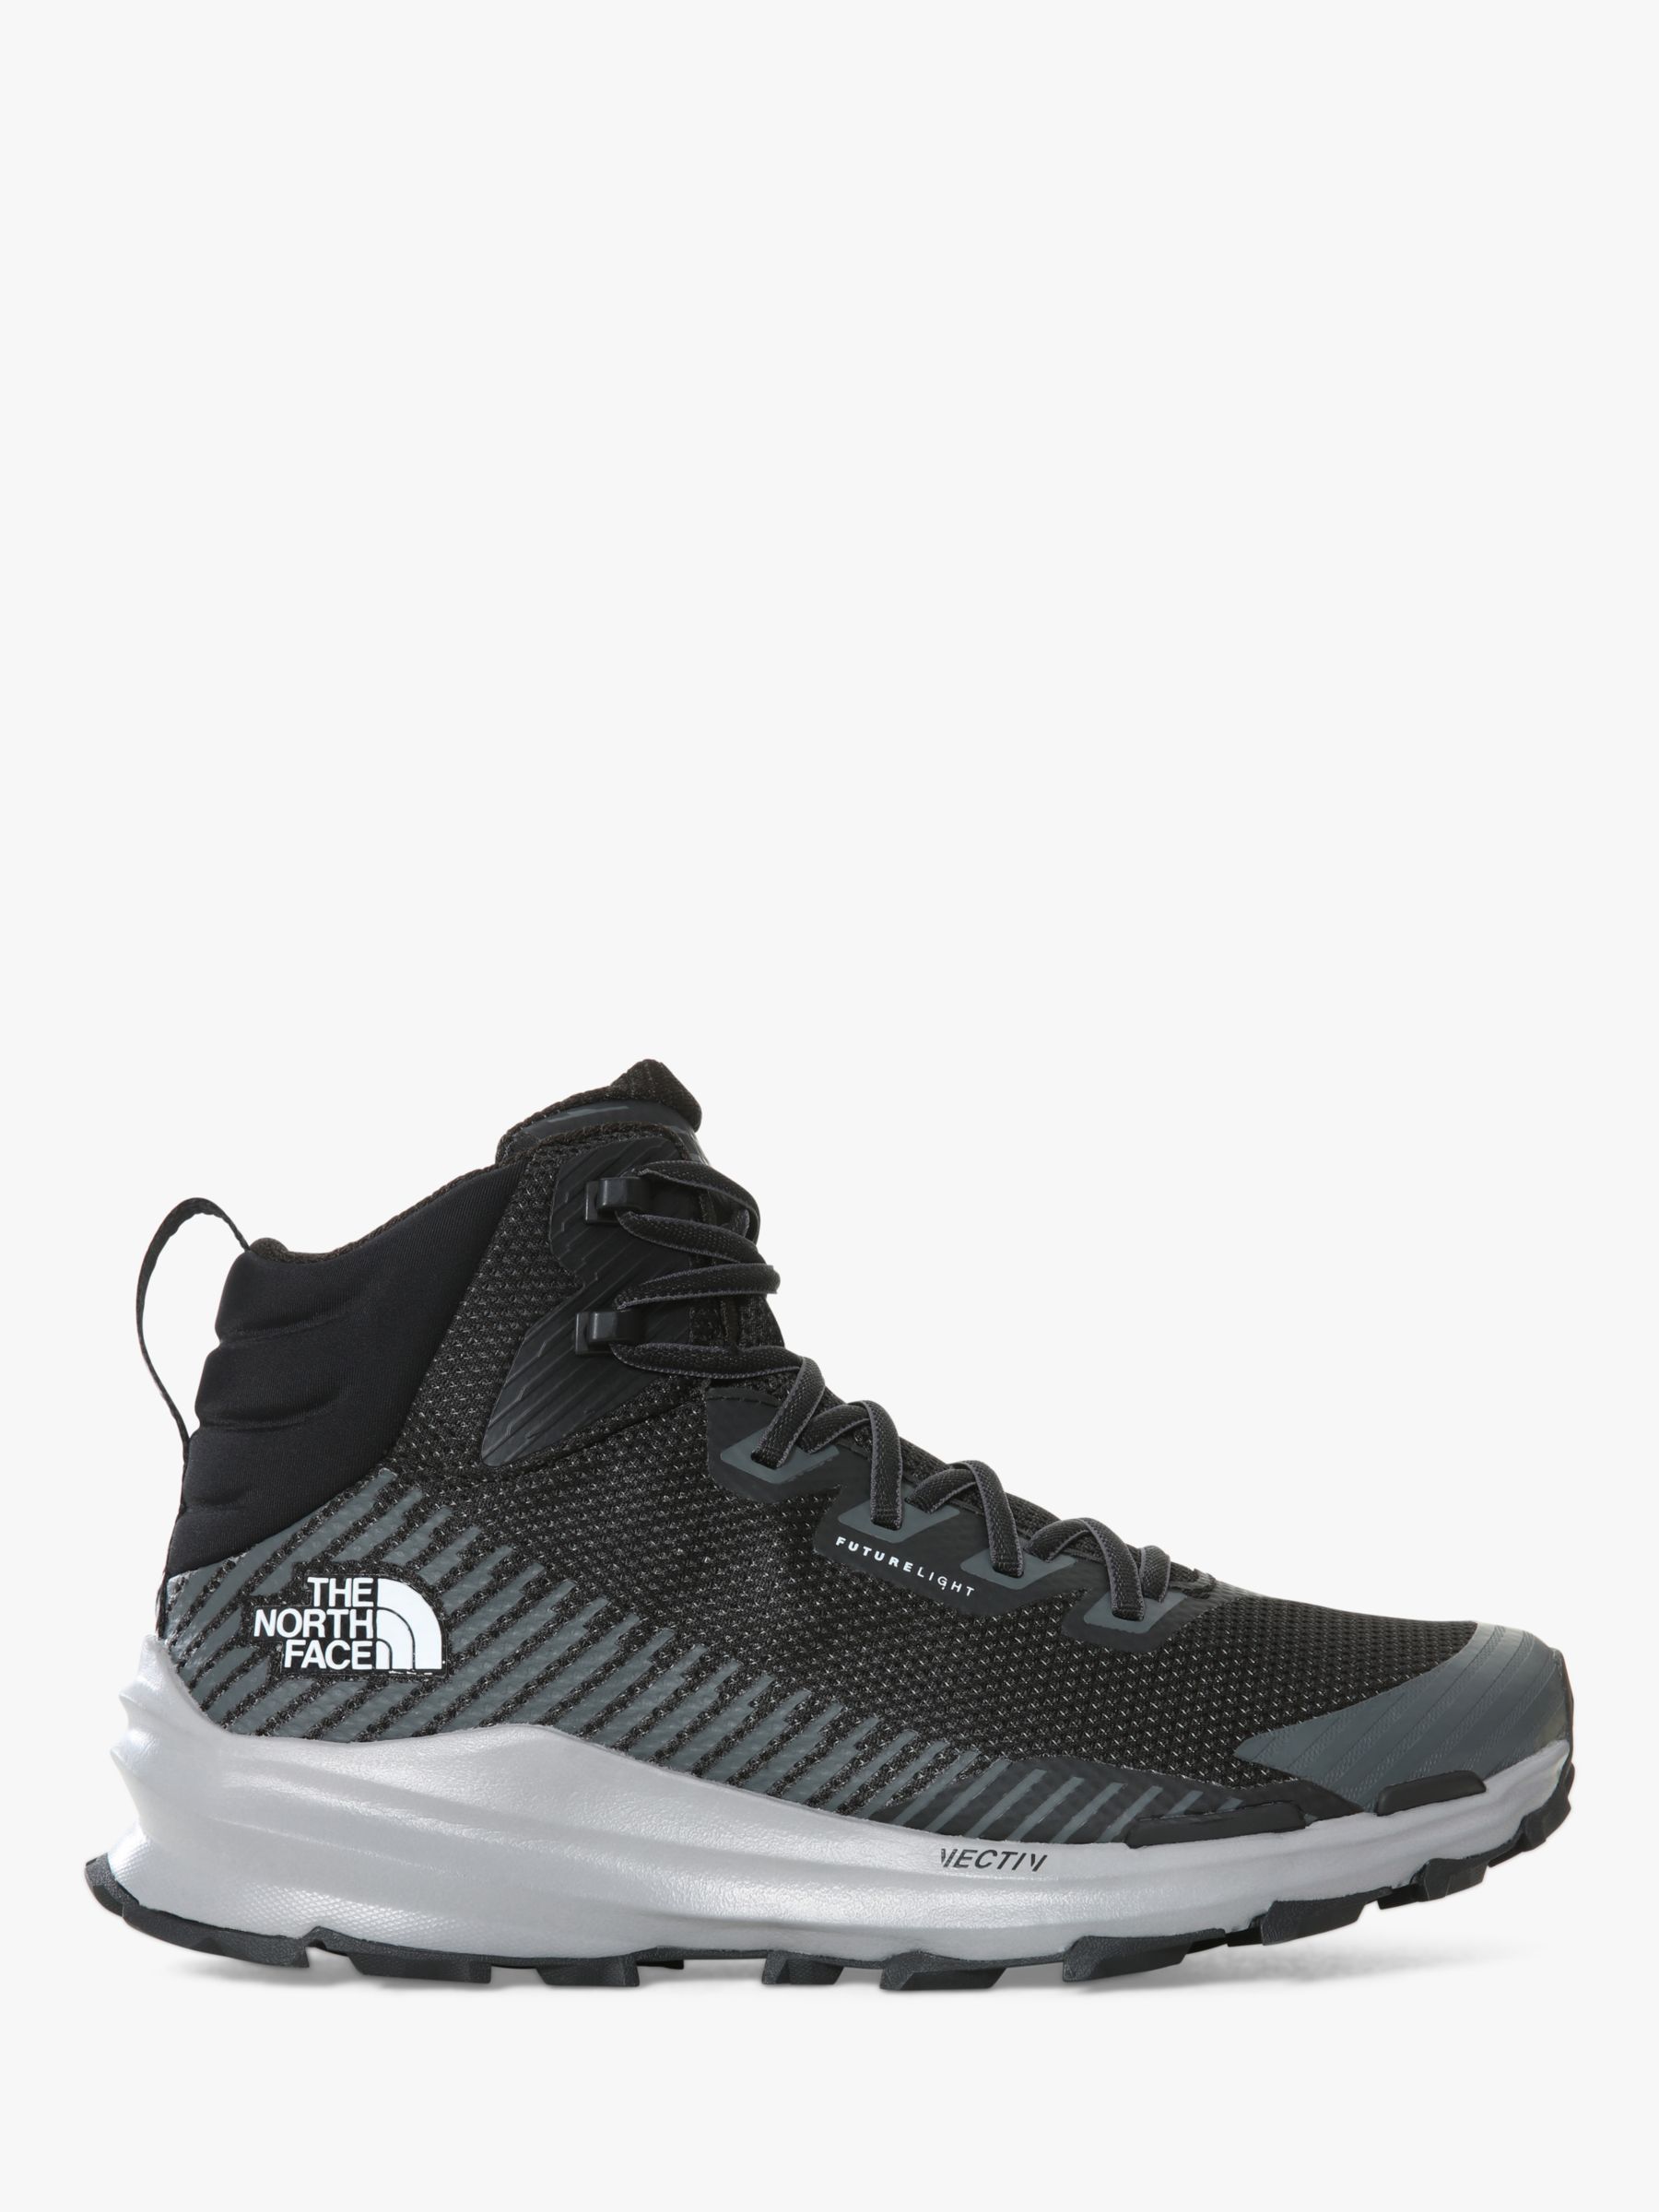 The North Face Vectiv Fastpack FUTURELIGHT™ Men's Walking Boots